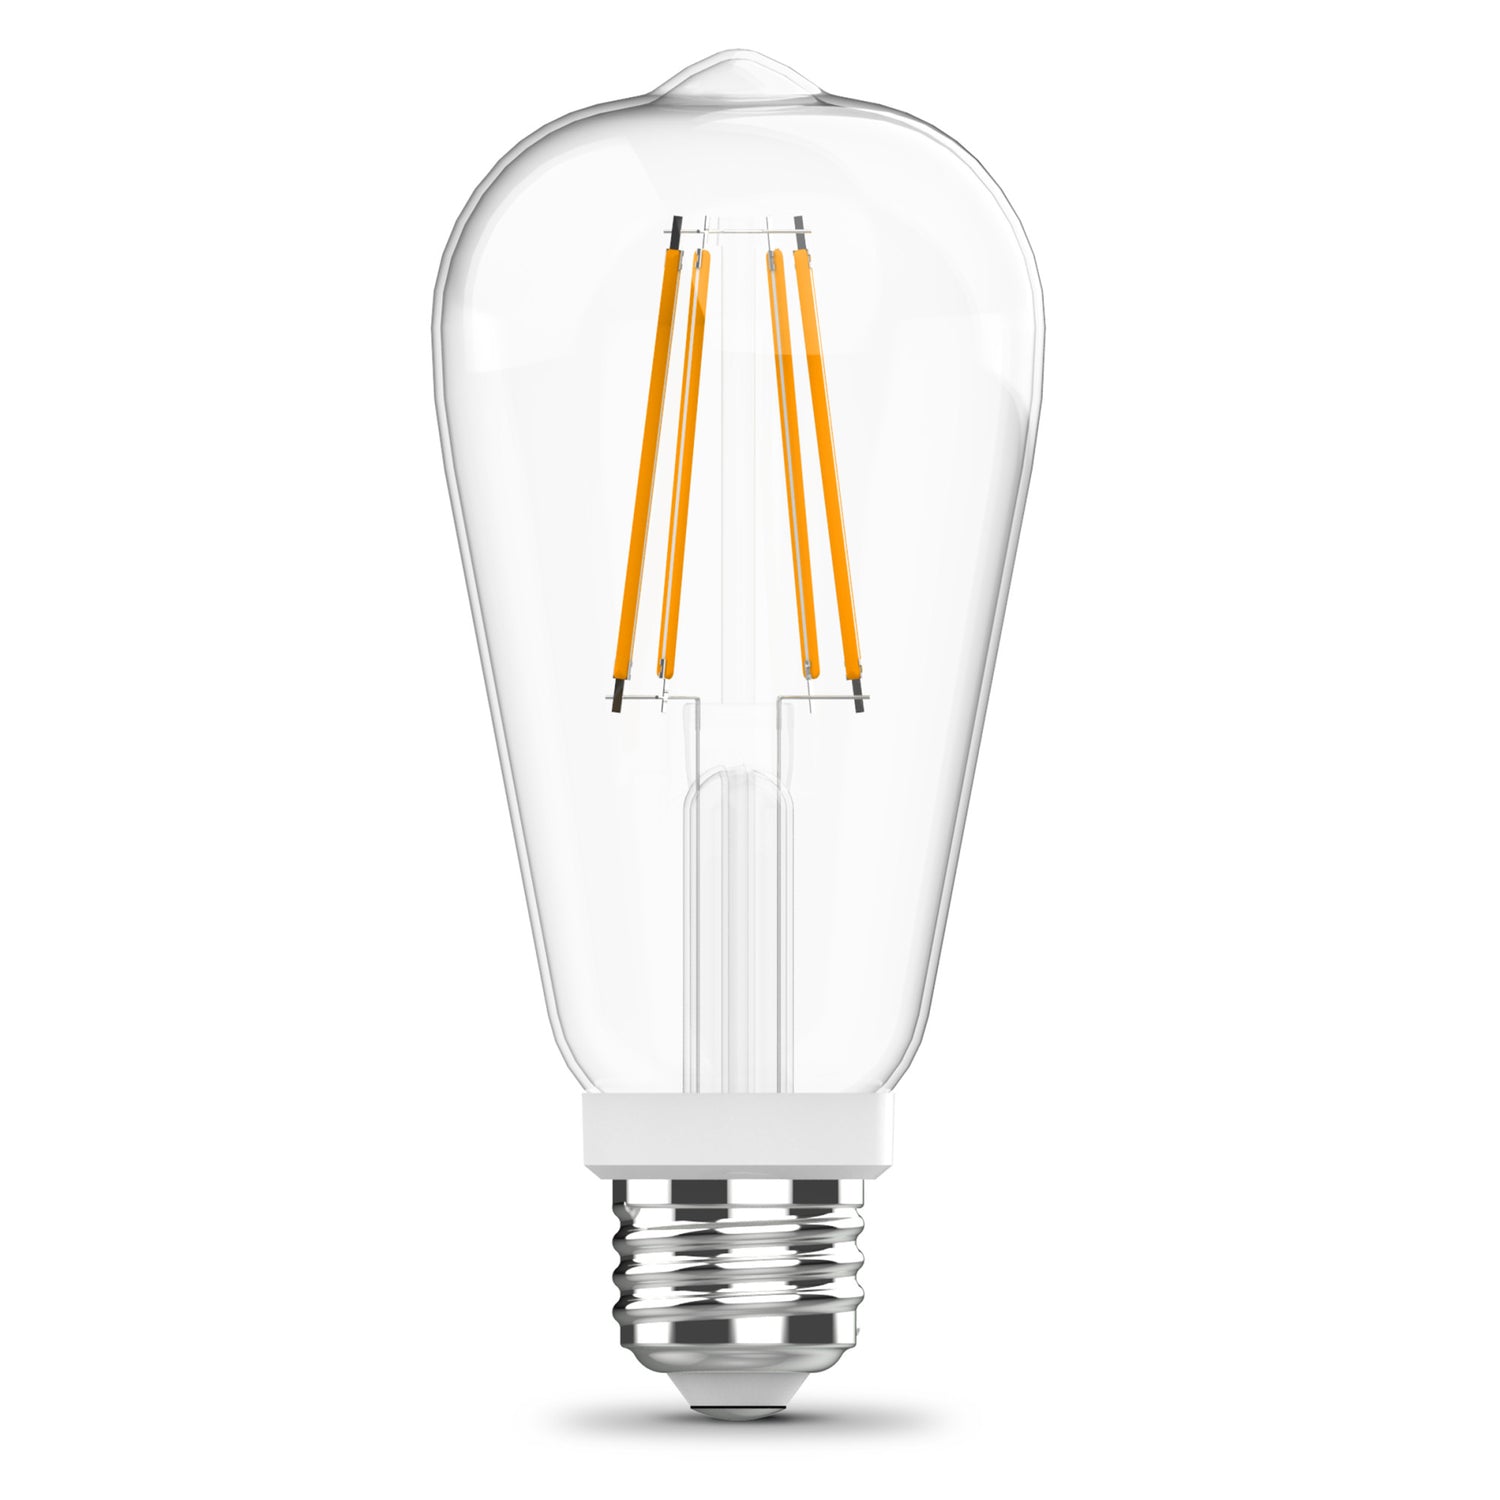 12W (100W Replacement) ST19 E26 Non-Dimmable Straight Filament Clear Glass Vintage Edison LED Light Bulb, Soft White